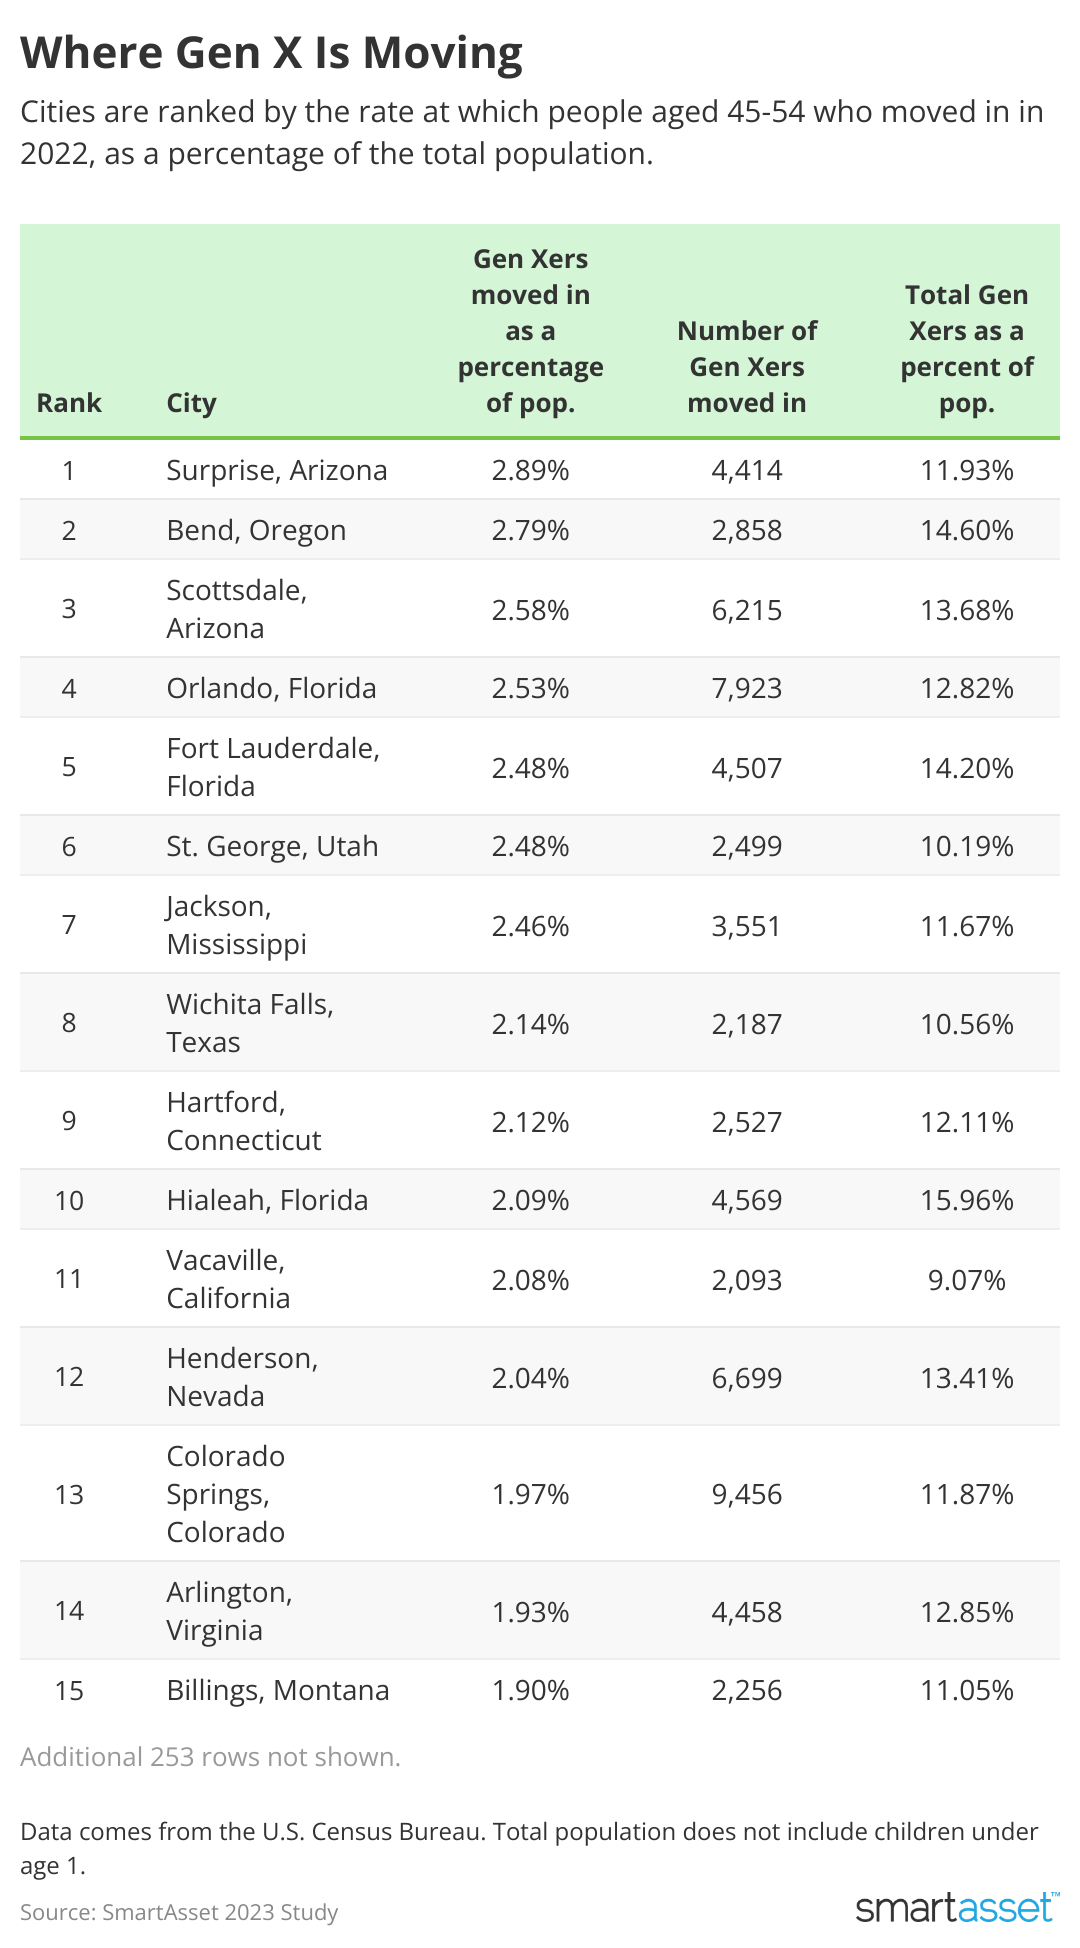 A chart showing where Gen X is moving; the top 15 Cities are ranked by the rate at which people aged 45-54 who moved in in 2022, as a percentage of the total population